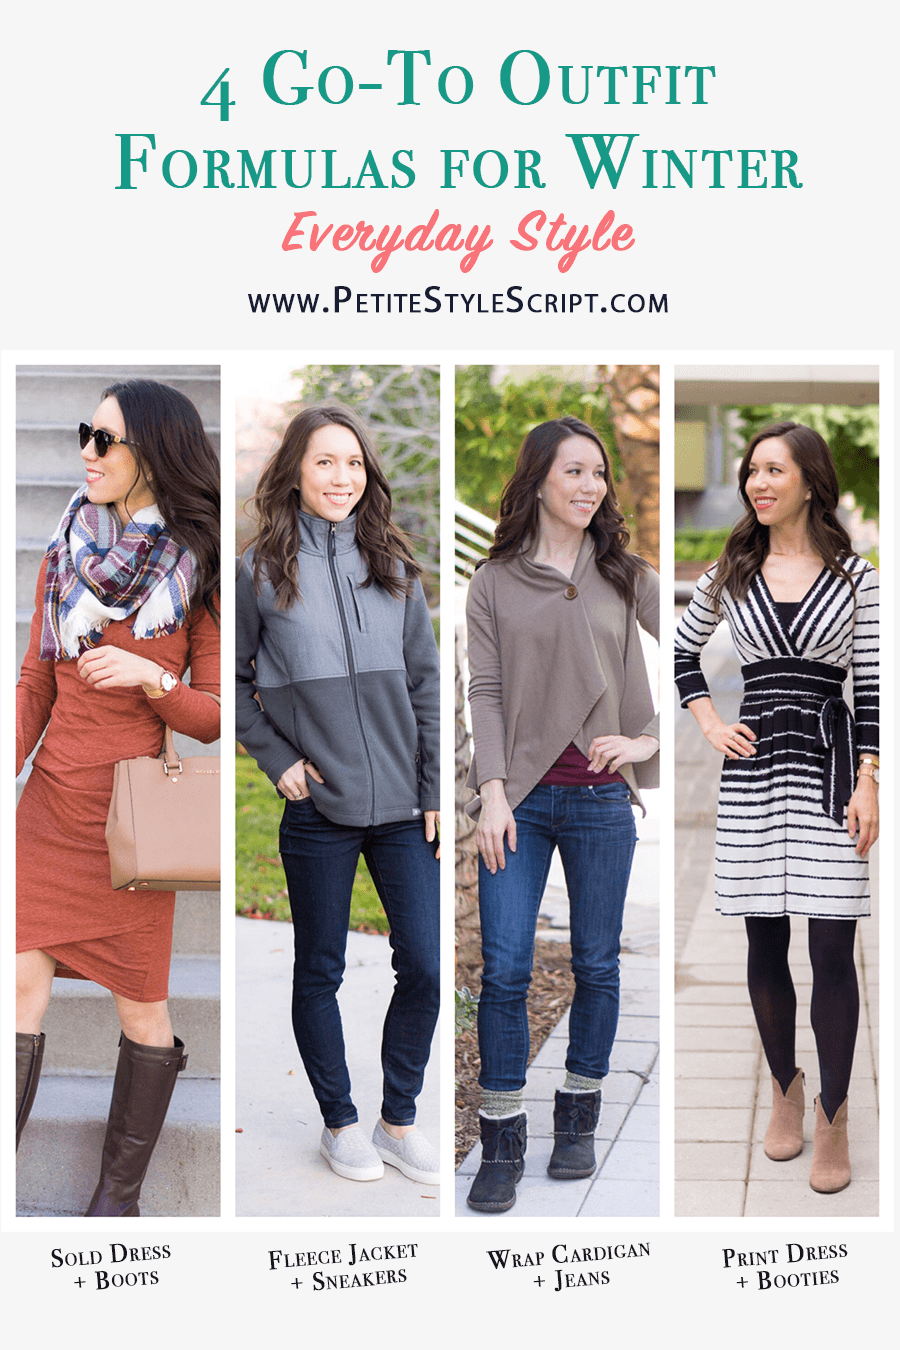 3 Casual Winter Outfits From the Winter Starter Kit Wardrobe Guide